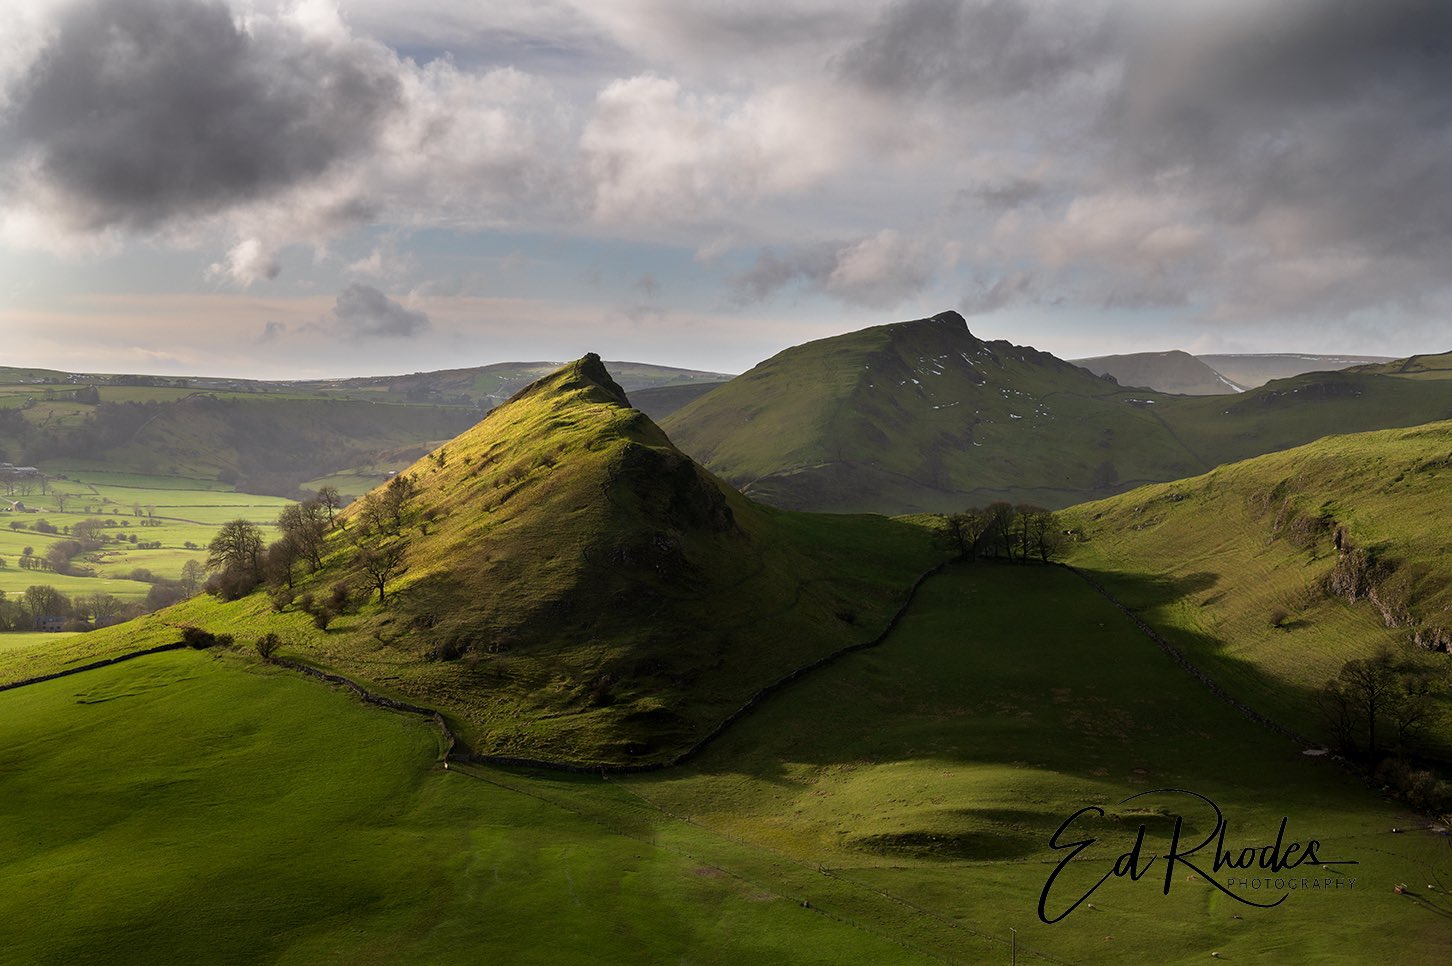 Derbyshire moods by Ed Rhodes @EdRhodesImages